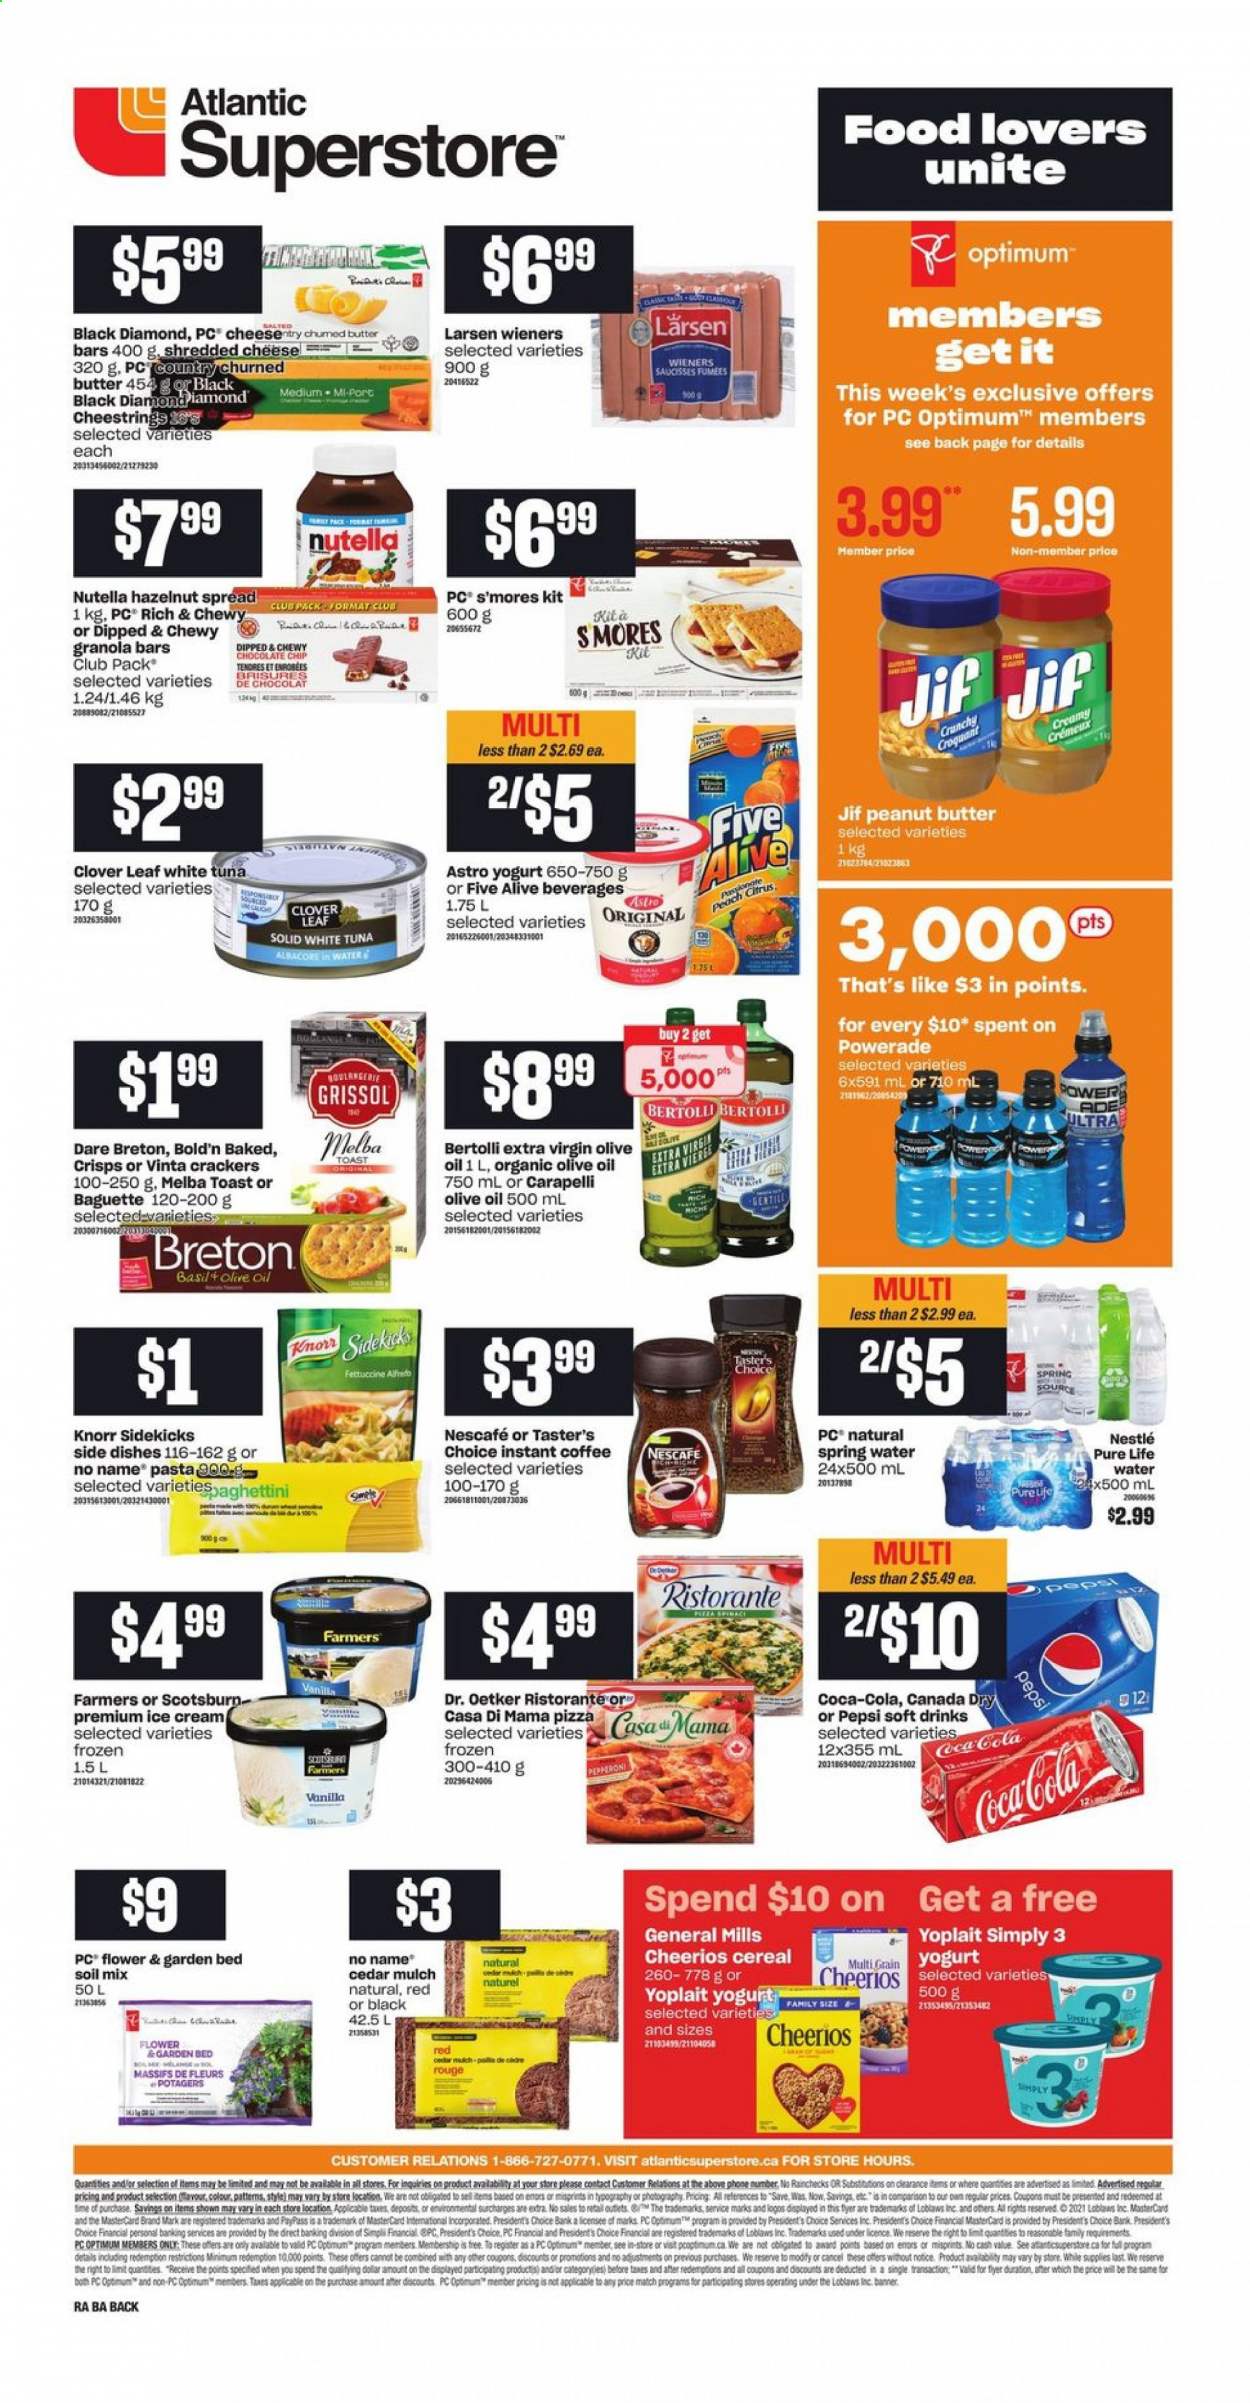 thumbnail - Atlantic Superstore Flyer - June 24, 2021 - June 29, 2021 - Sales products - tuna, No Name, pasta, Bertolli, pepperoni, string cheese, Dr. Oetker, Président, yoghurt, Clover, Yoplait, ice cream, chocolate chips, crackers, cereals, Cheerios, granola bar, esponja, extra virgin olive oil, olive oil, oil, peanut butter, hazelnut spread, Jif, Canada Dry, Coca-Cola, Powerade, Pepsi, soft drink, spring water, Pure Life Water, instant coffee, Optimum, garden bed, garden mulch, Knorr, Nestlé, Nutella, Nescafé. Page 2.